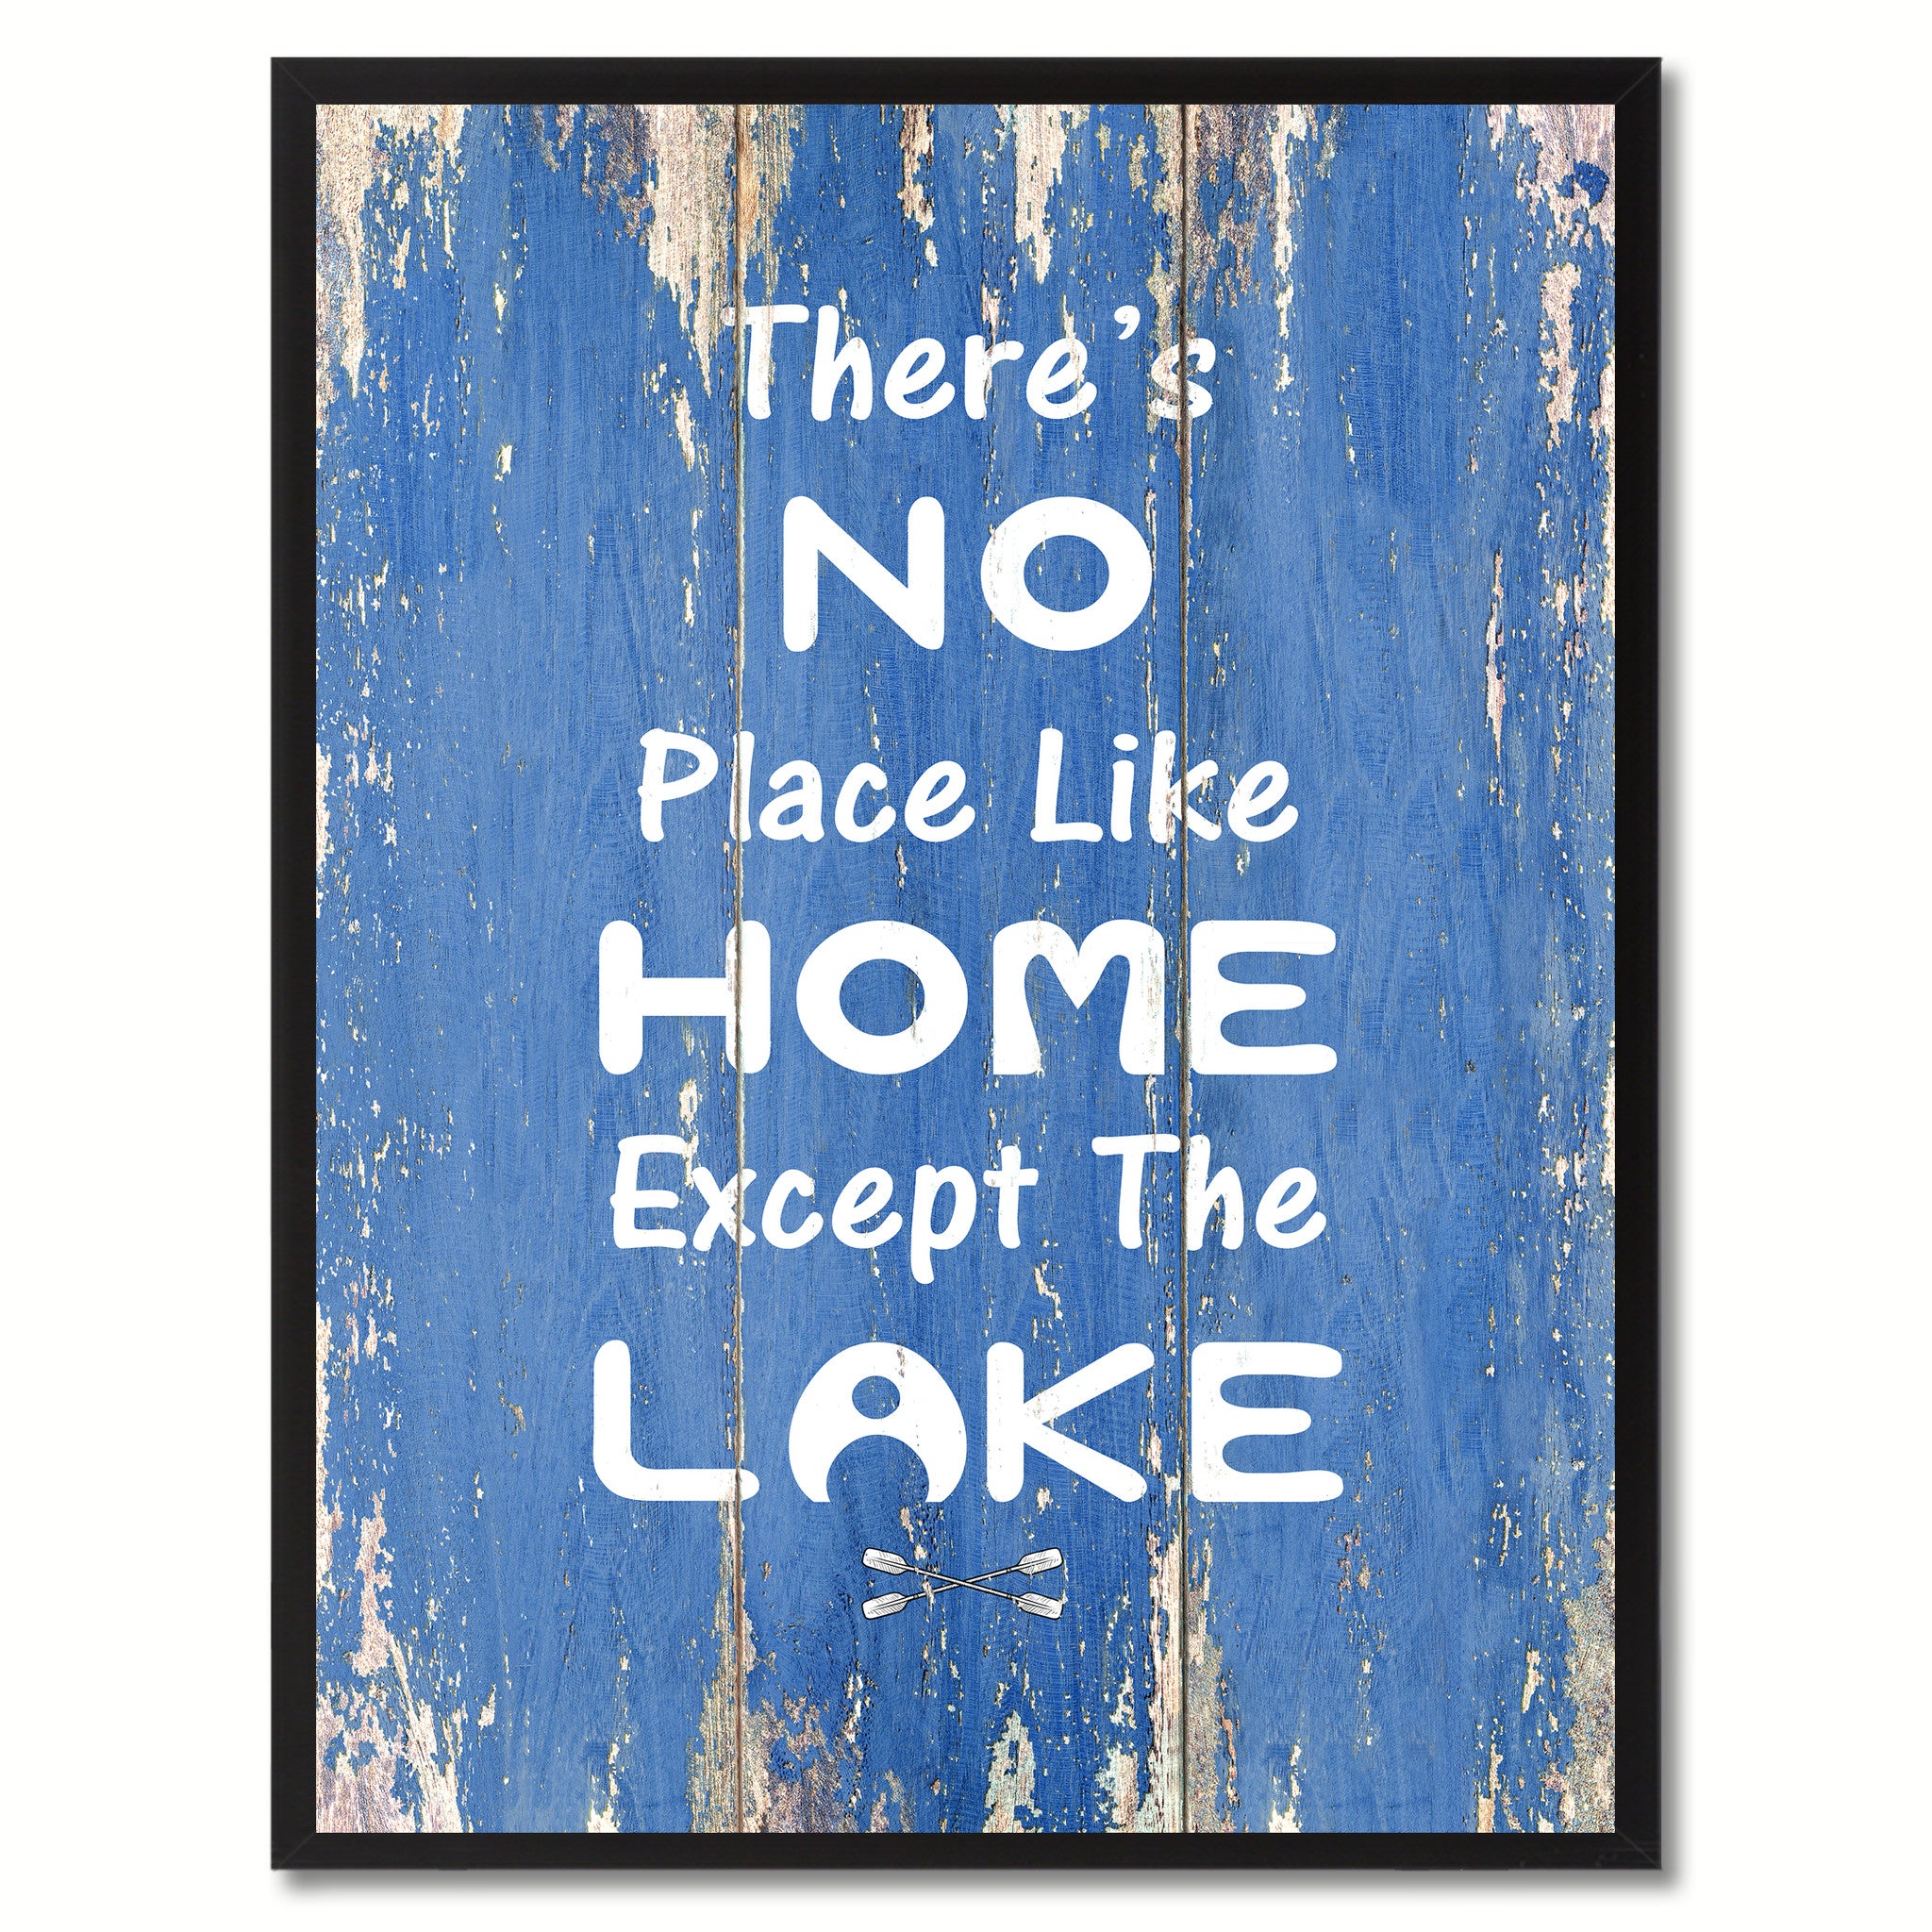 There's No Place Like Home Except The Lake Saying Canvas Print, Black Picture Frame Home Decor Wall Art Gifts